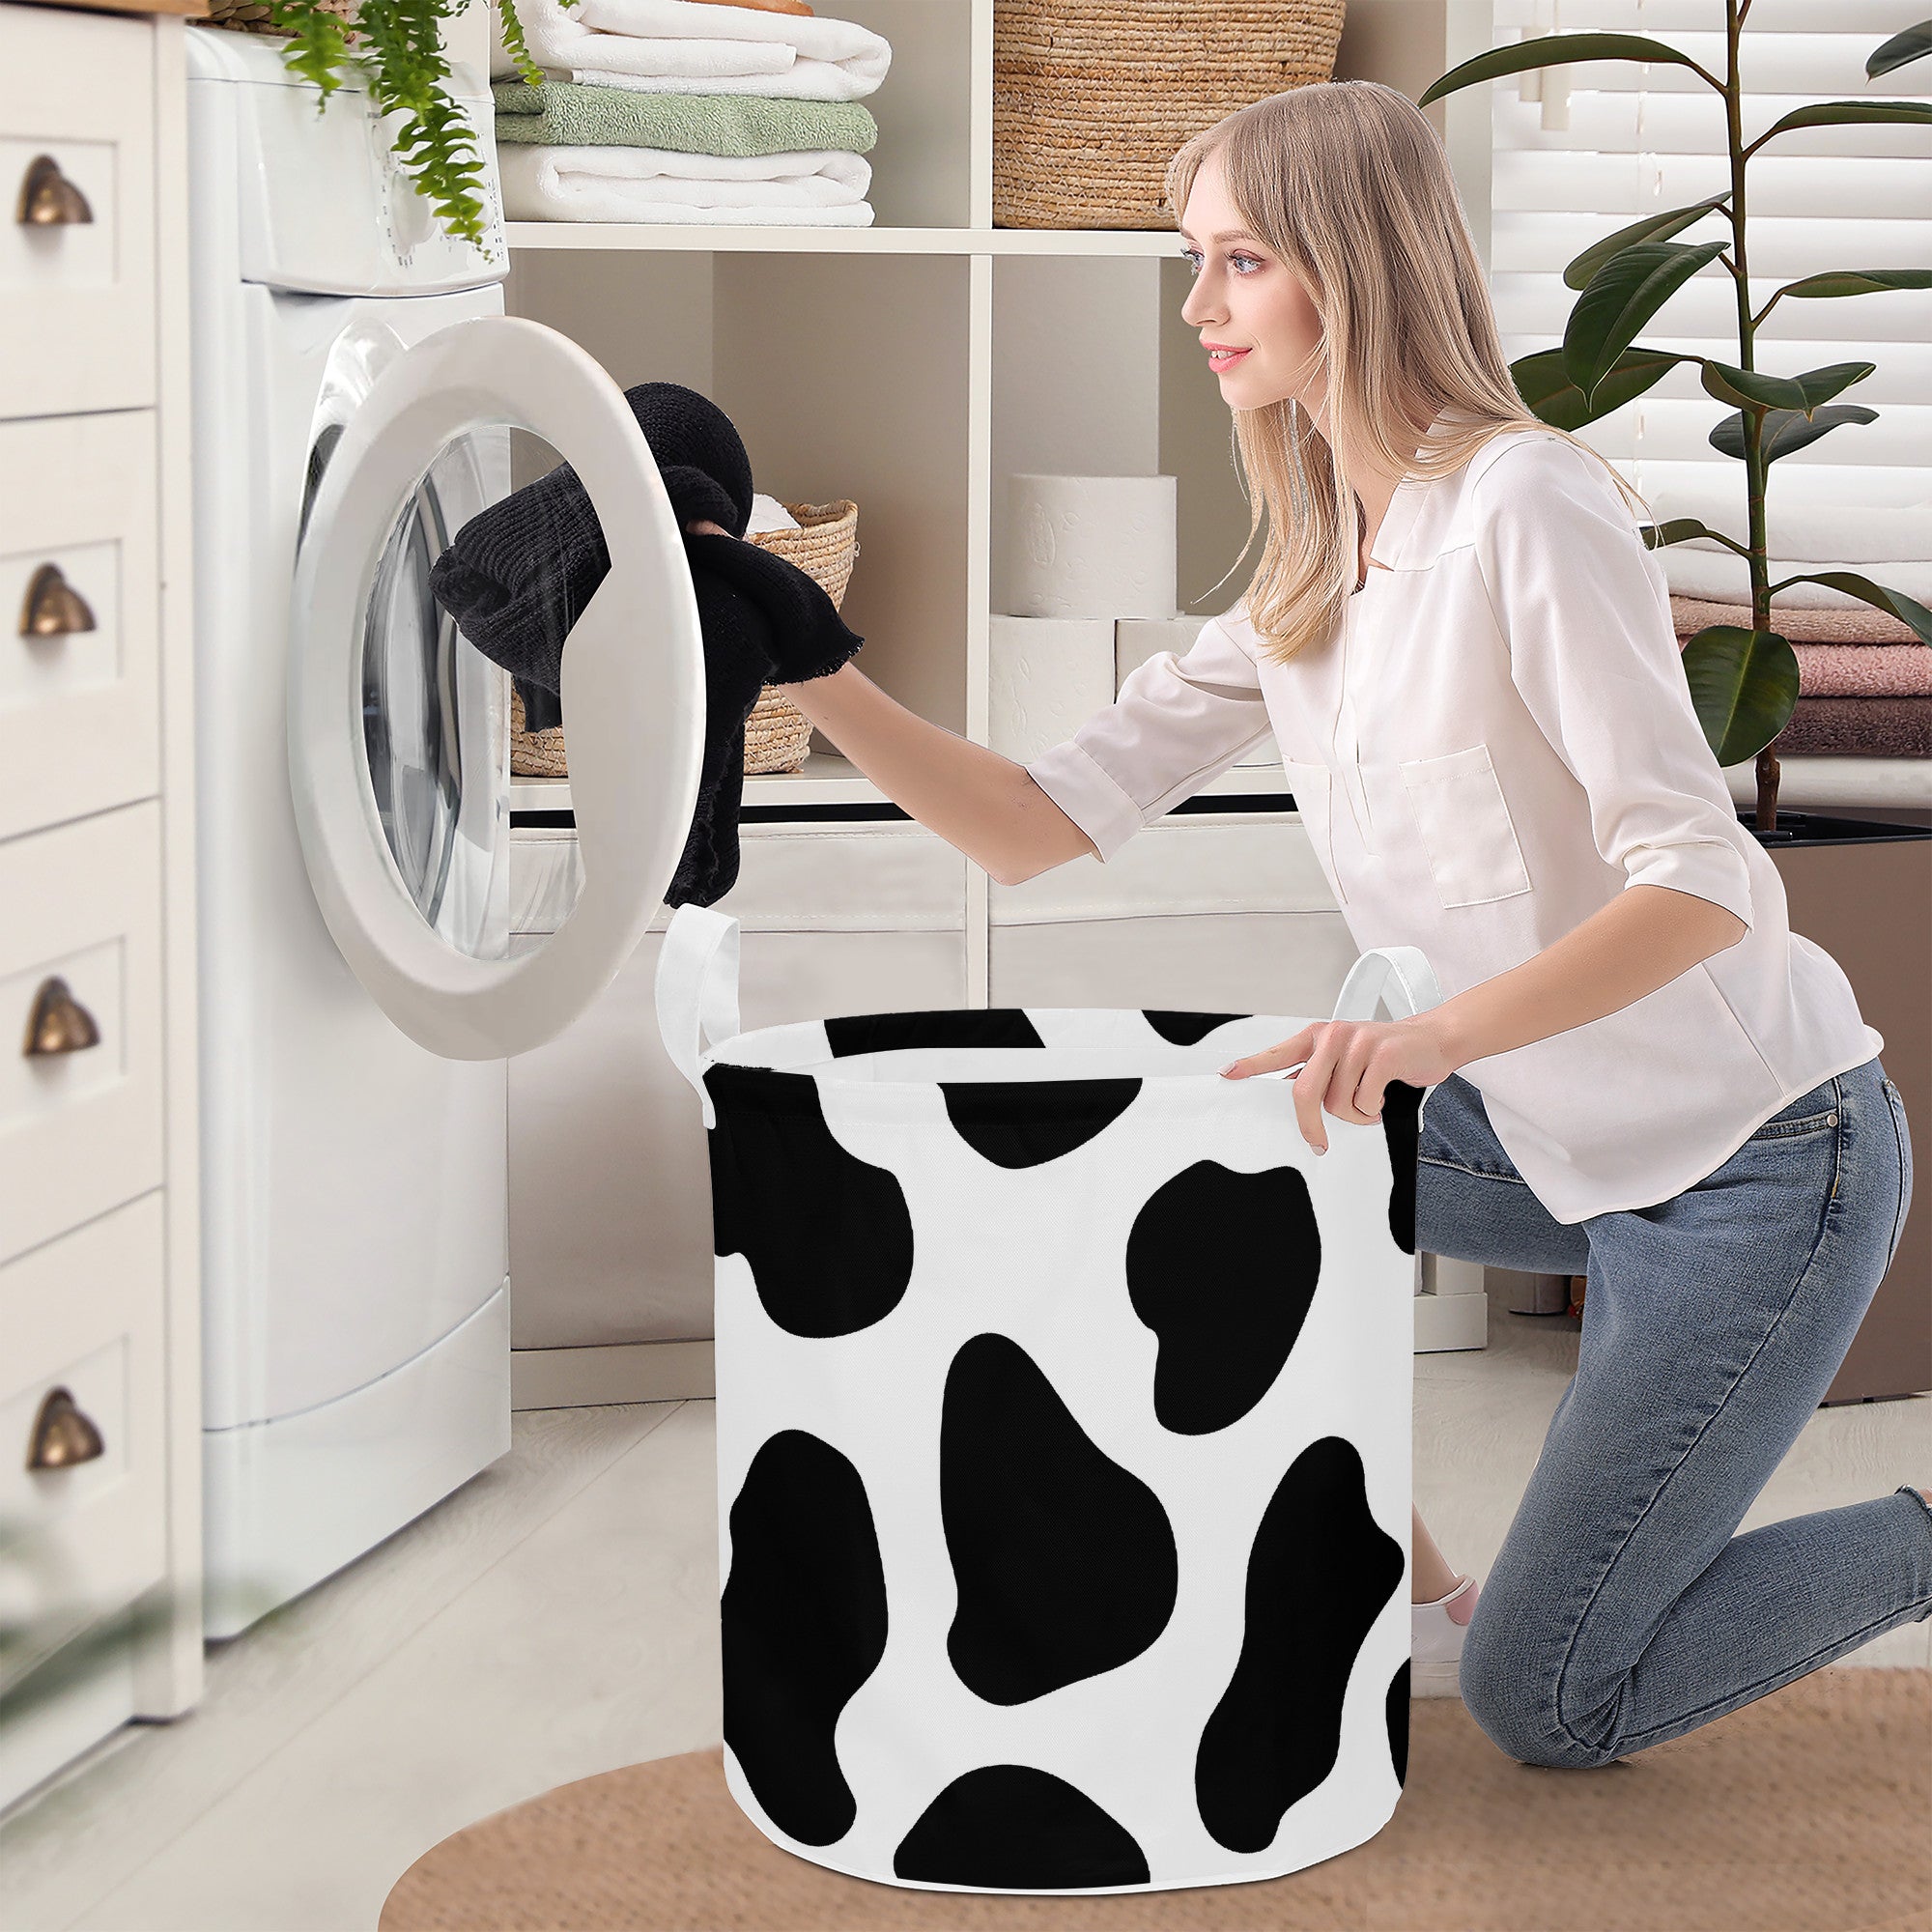 Round Laundry Basket Cow print black and white Home-clothes-jewelry